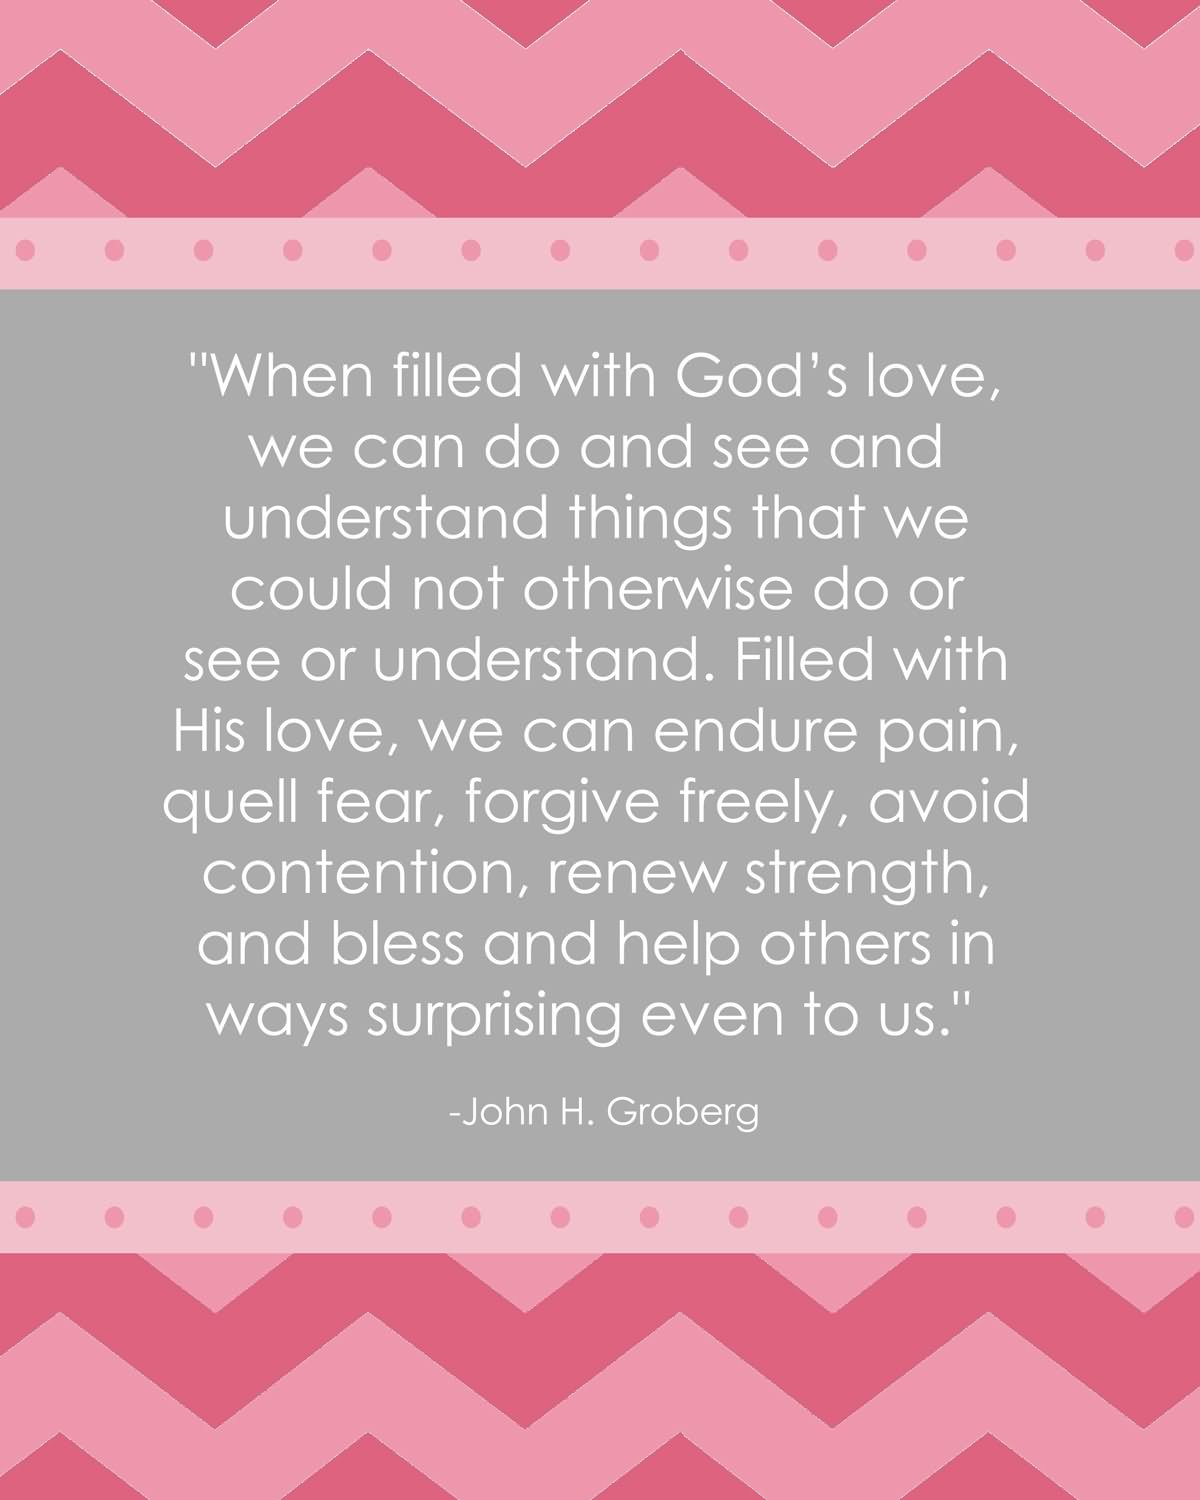 When filled with God’s love, we can do and see and understand things that we could not otherwise do or see or understand. Filled with His love, we can endure pain, quell fear, forgive freely, avoid contention, renew strength, and bless and help others in ways surprising even to us.